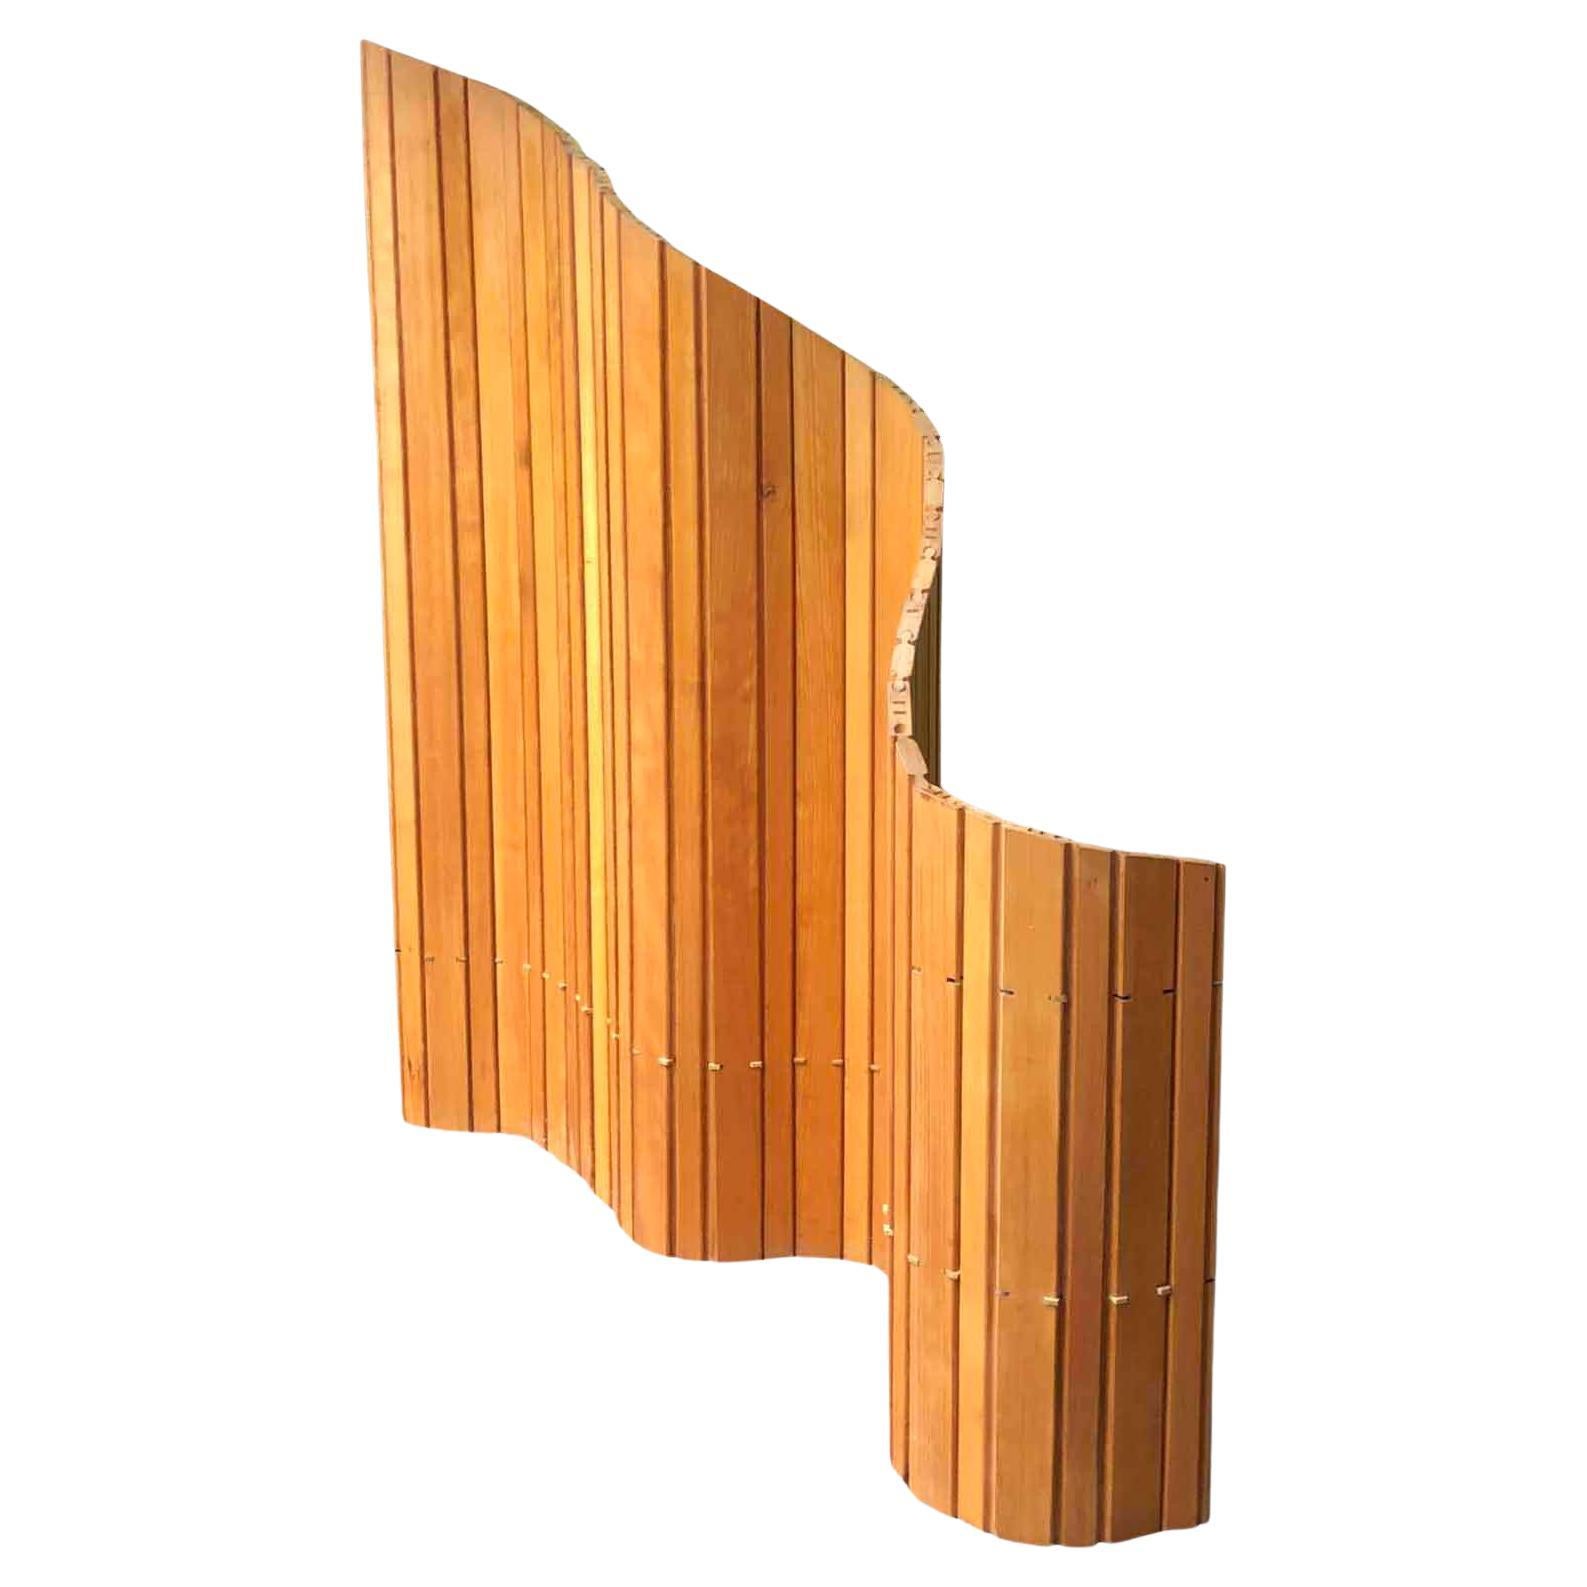 Room Divider or Screen in Wood